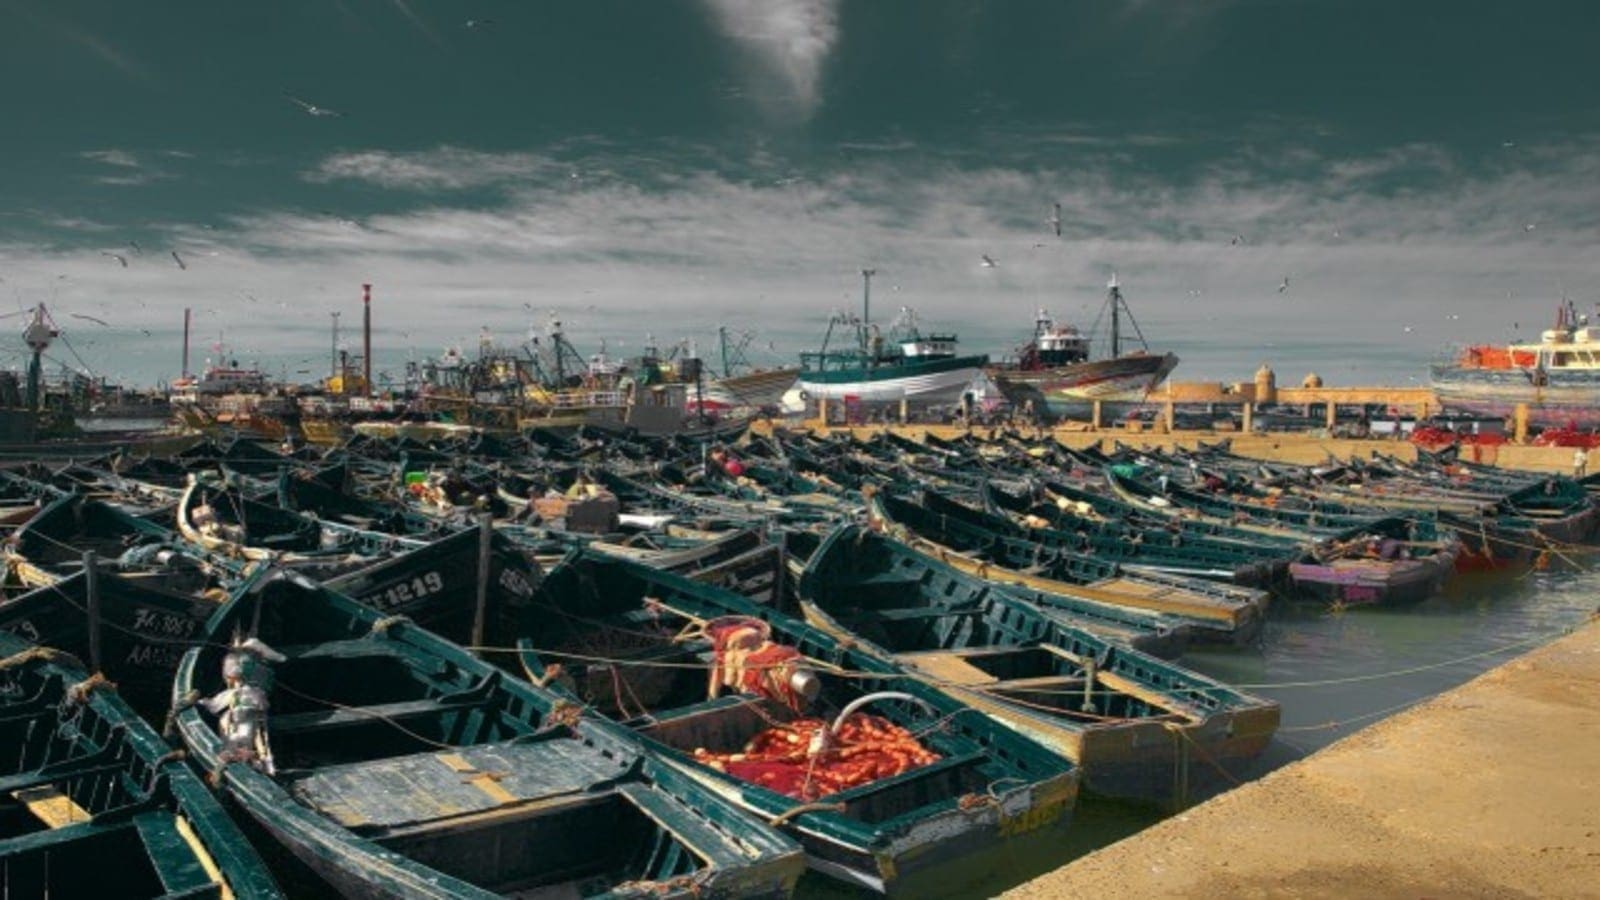 Morocco allows Russian fishing vessels to operate in its waters in new legal framework